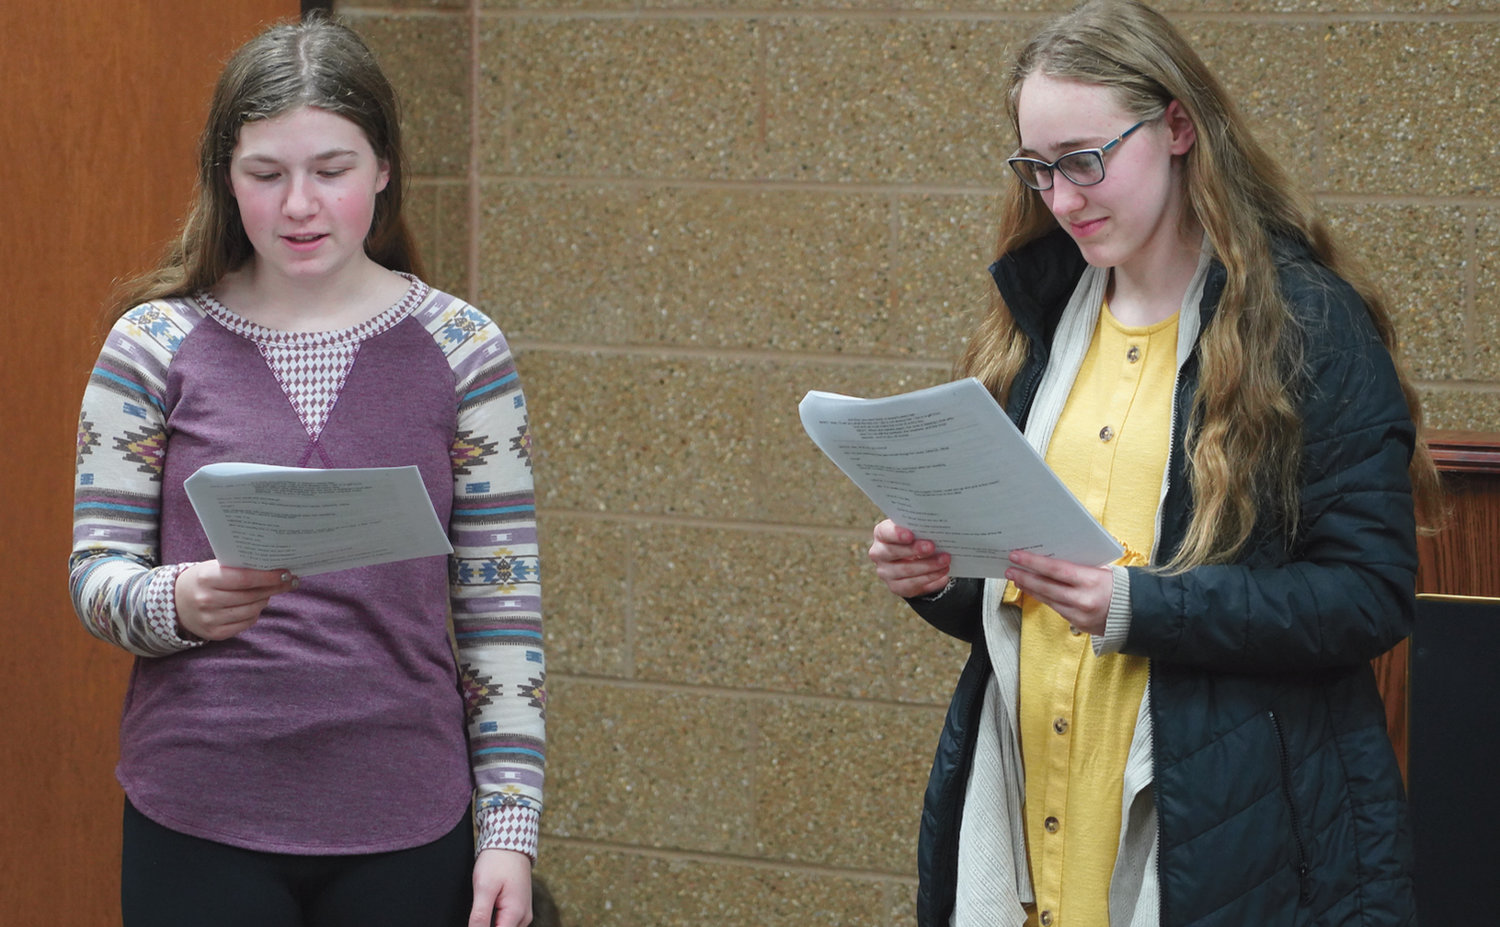 Sarah Fuerst, left, and Clara Carstensen auditioned Saturday at the De Smet Event Center for roles in the 51st running of the Laura Ingalls Wilder Pageant. The pageant will run July 8-10, 15-17 and 22-24.